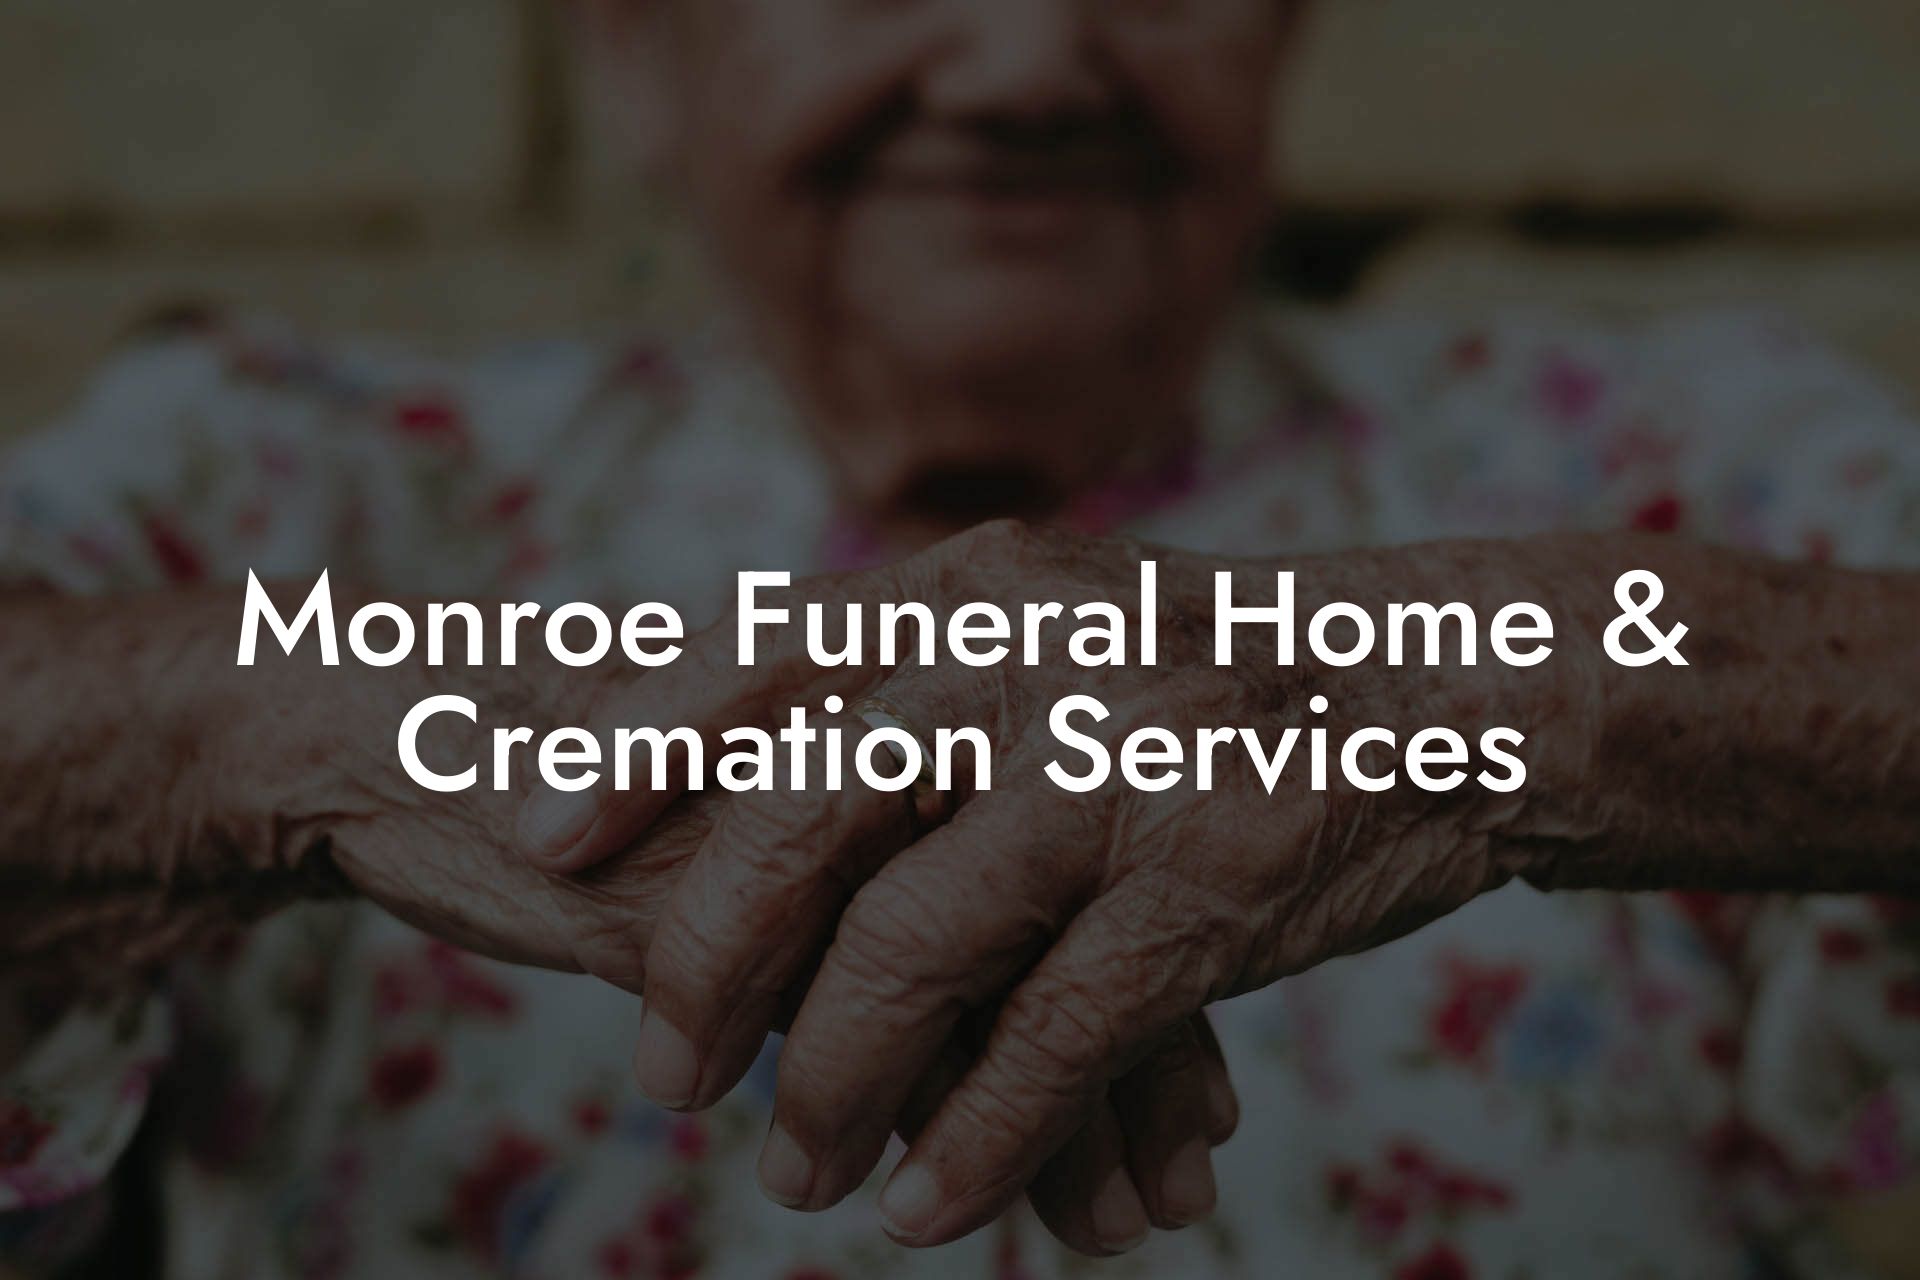 Monroe Funeral Home & Cremation Services